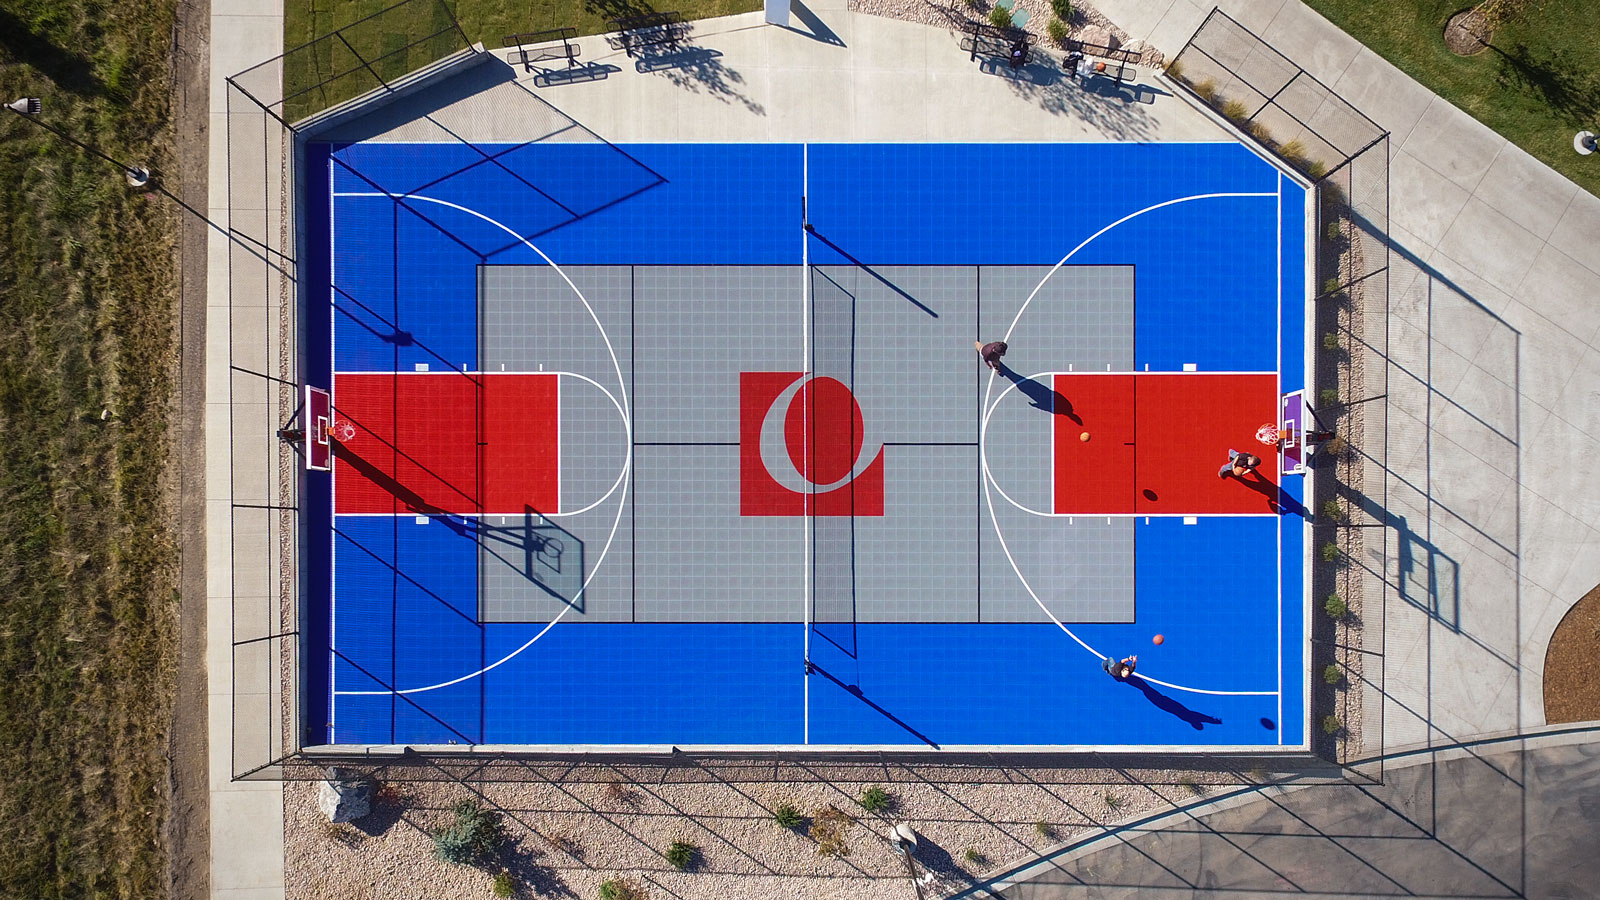 Overhead view of the Overstock.com multi-court, with custom painted logo and game lines for many sports